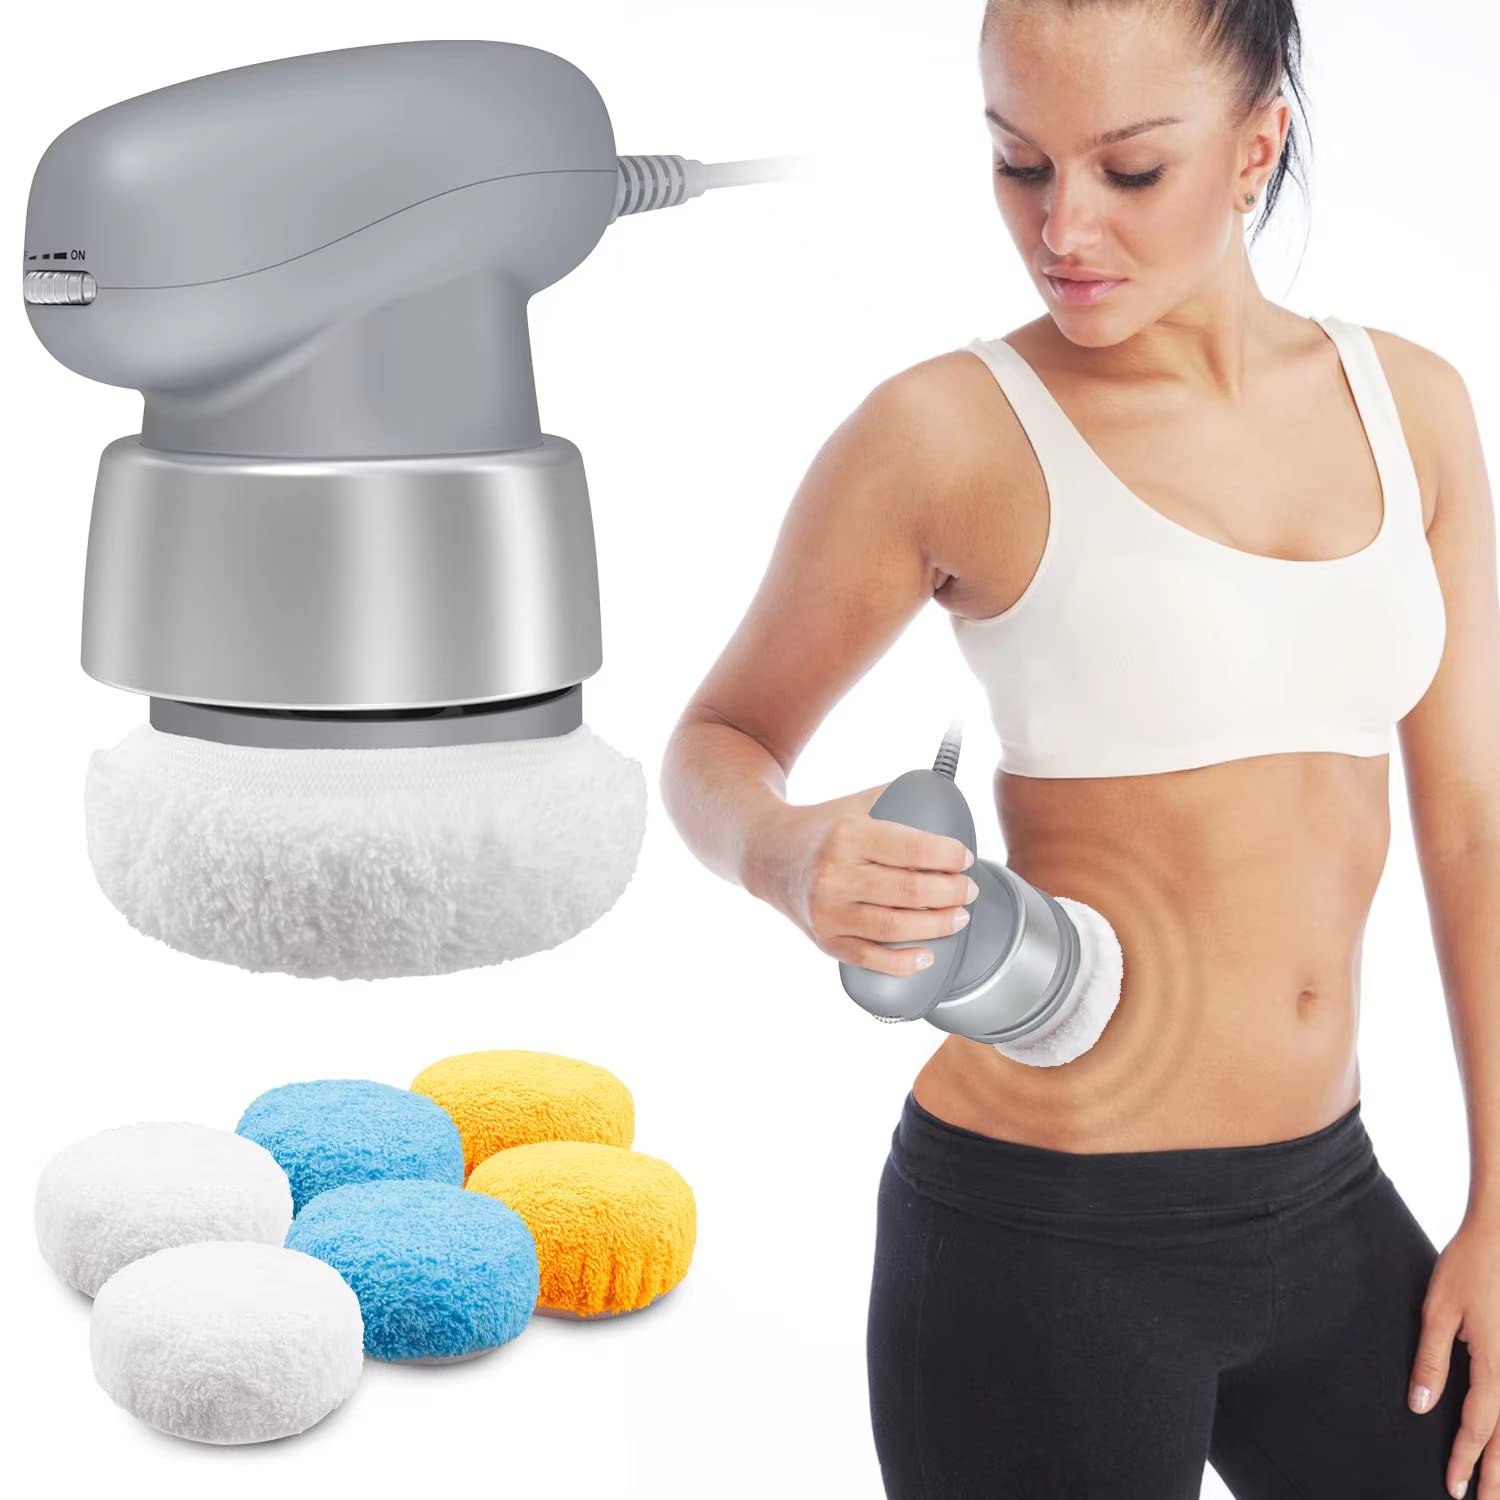 MARZTEC Cellulite Massager Body Sculpting Machine – Body Sculpting Massager with 6 Washable Pads, Adjustable Speeds – Electric Handheld Massager for Belly, Waist, Legs, Arms, Butt